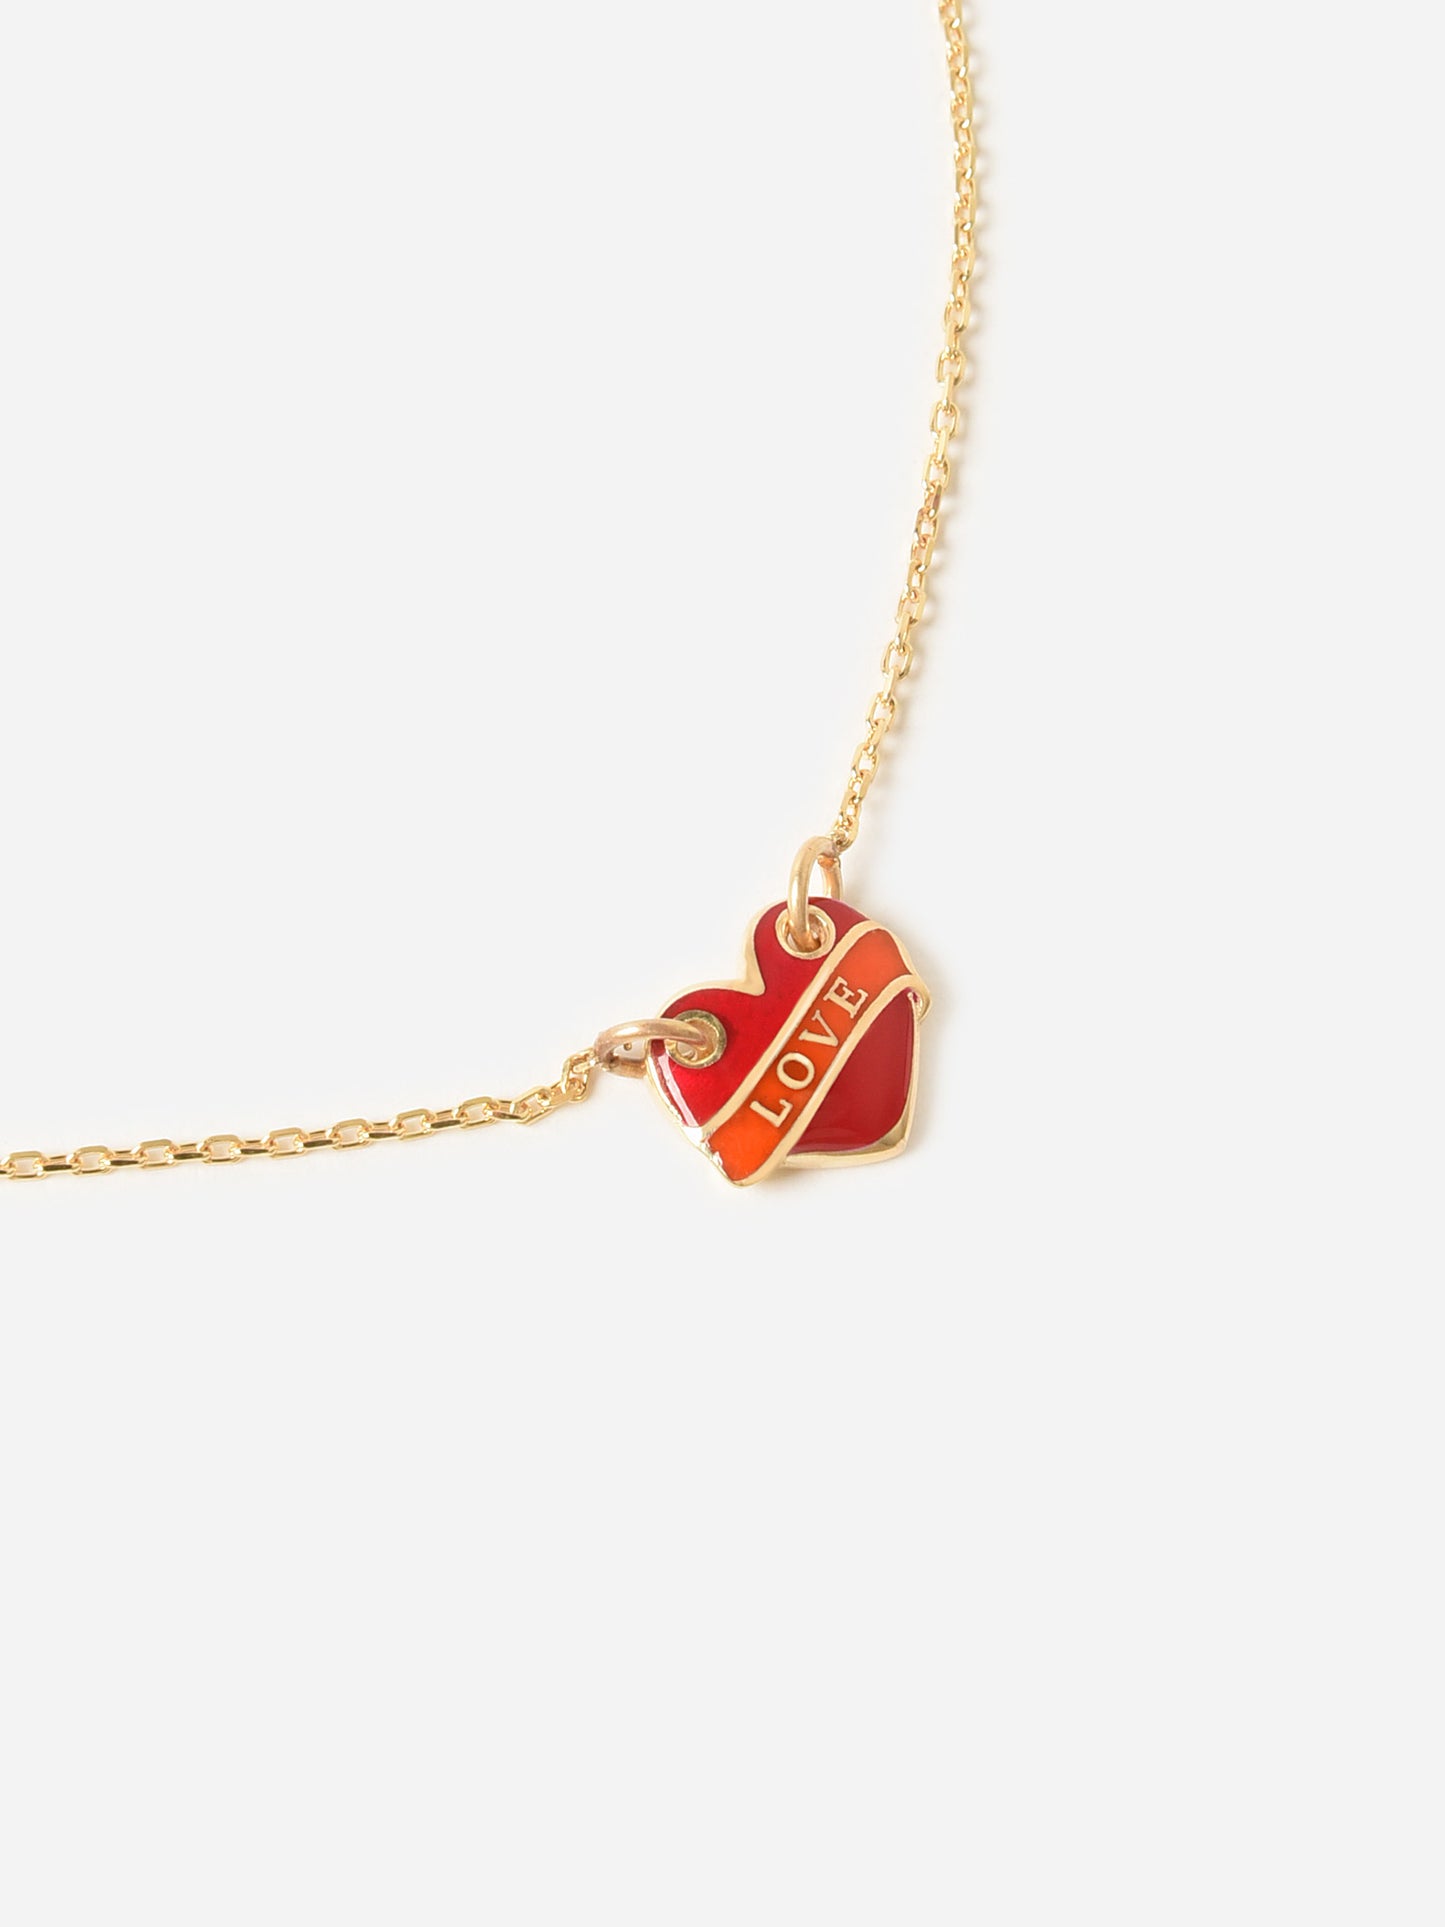 Maison Irem Women's All You Need Is Love Necklace